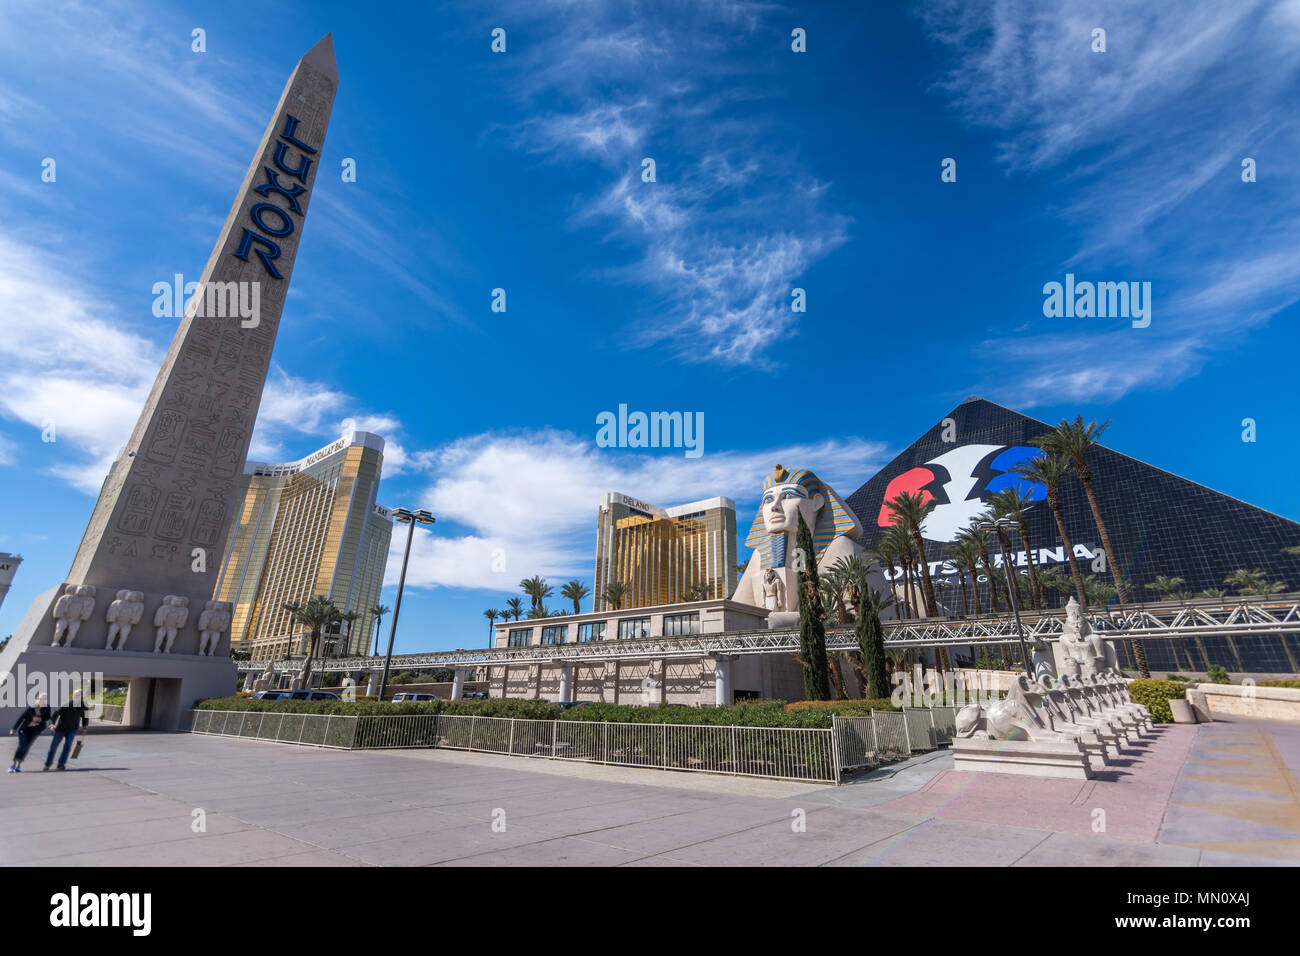 Las Vegas, US - April 28, 2018: The famous Luxor pyramid hotel in Las vegas as seen on a sunny day Stock Photo